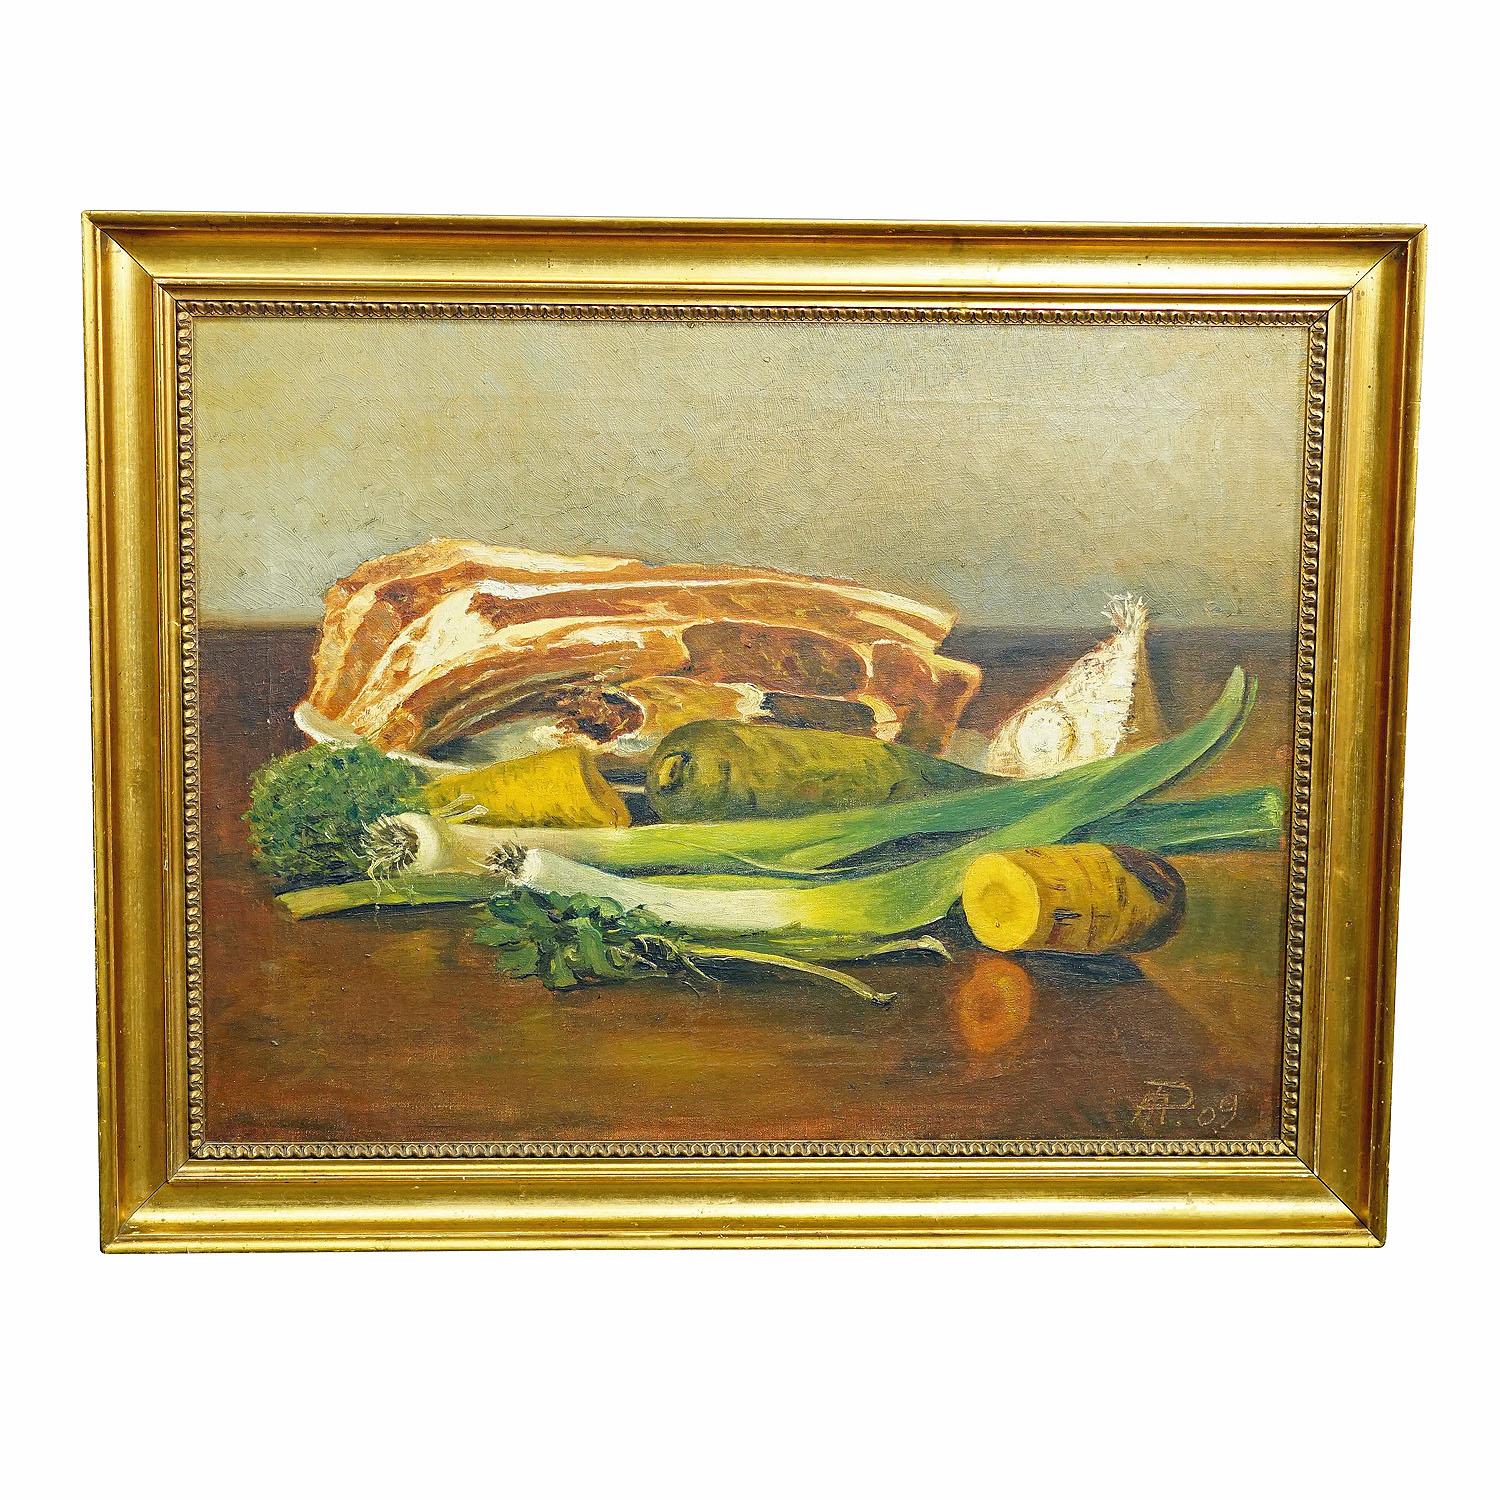 Unknown - still life with meat and vegetables, oil on canvas, Germany 1909.

An impressive still life painting depicting meat, and diverse vegetables. Painted in oil on canvas with pastell colors. Framed with antique richly decorated gilded frame.